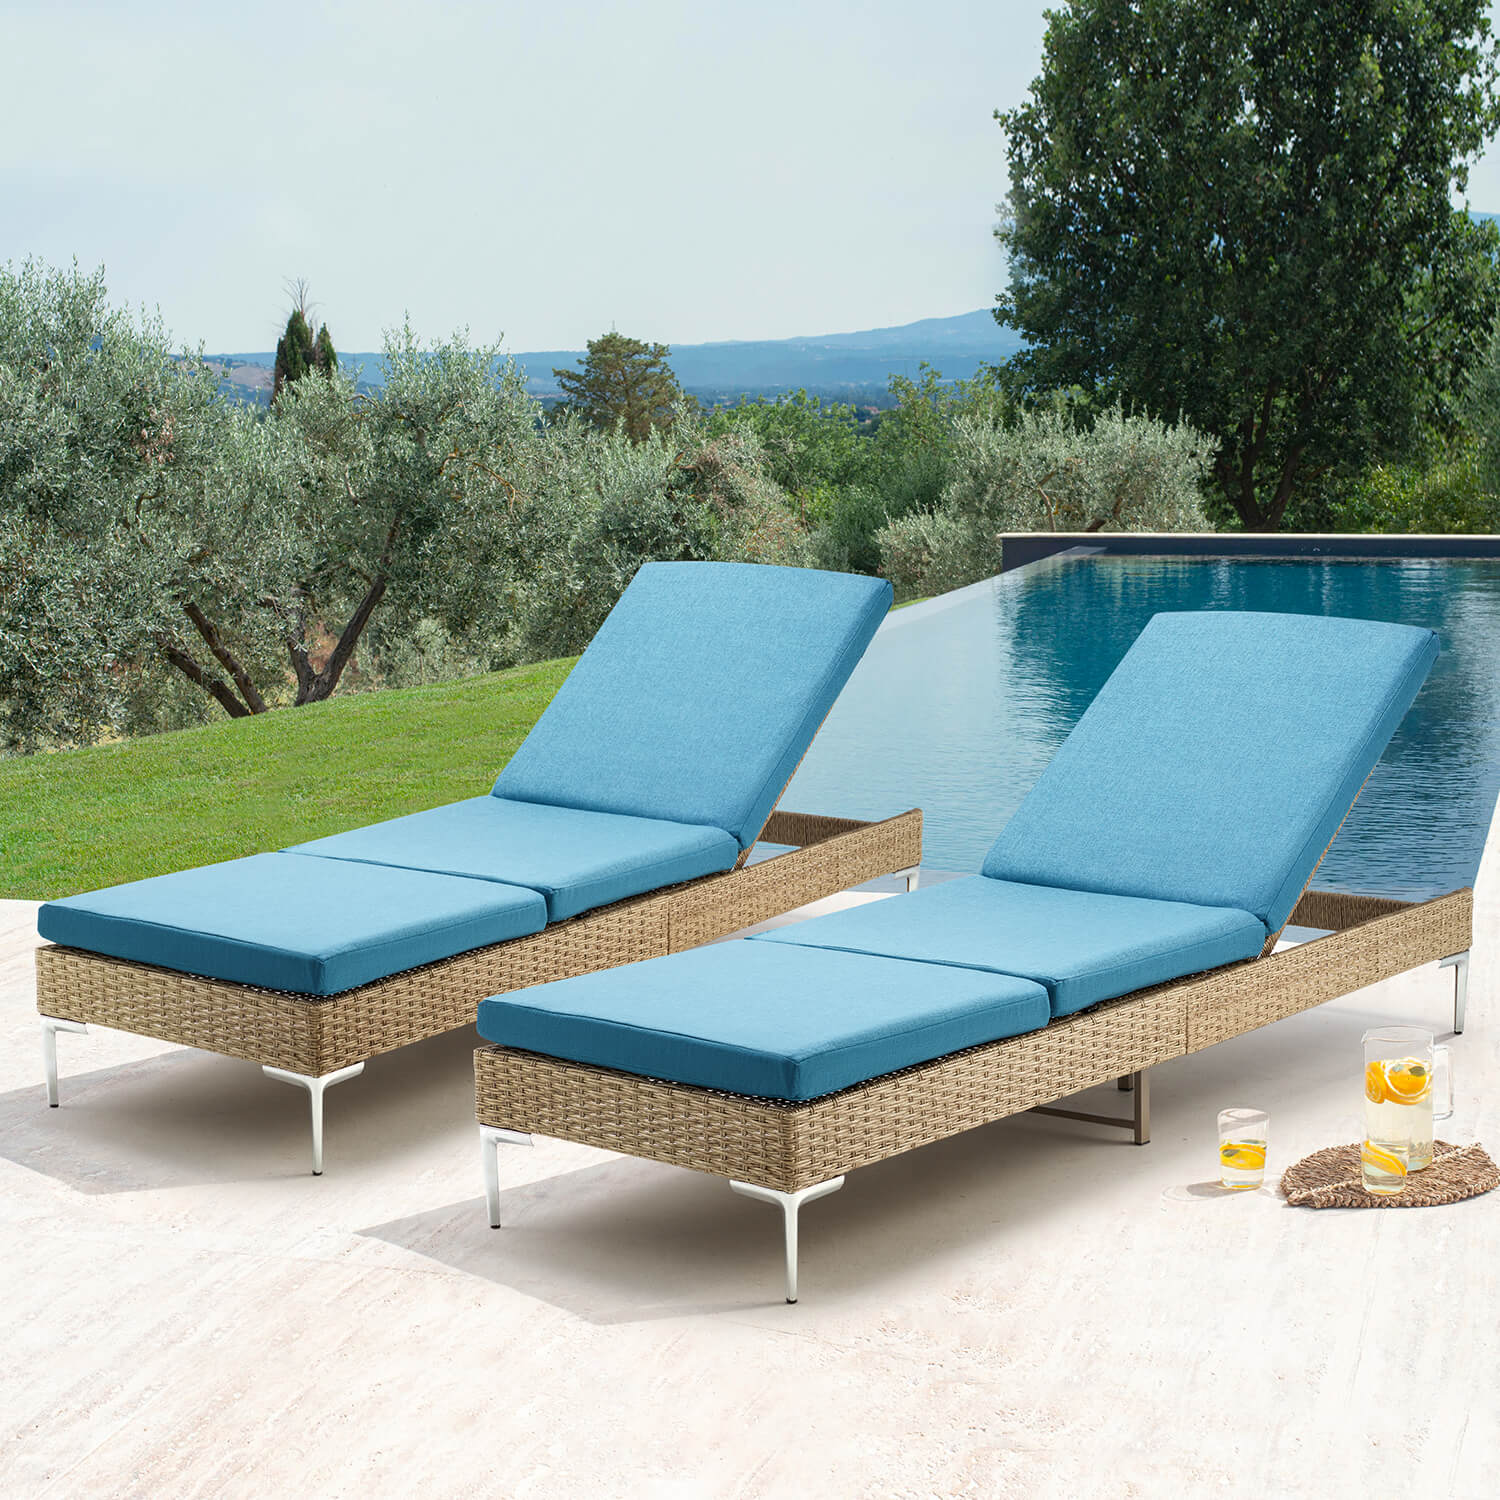 2-pieces-patio-rattan-chaise-lounge-chair-outdoor-wicker-recliner-blue